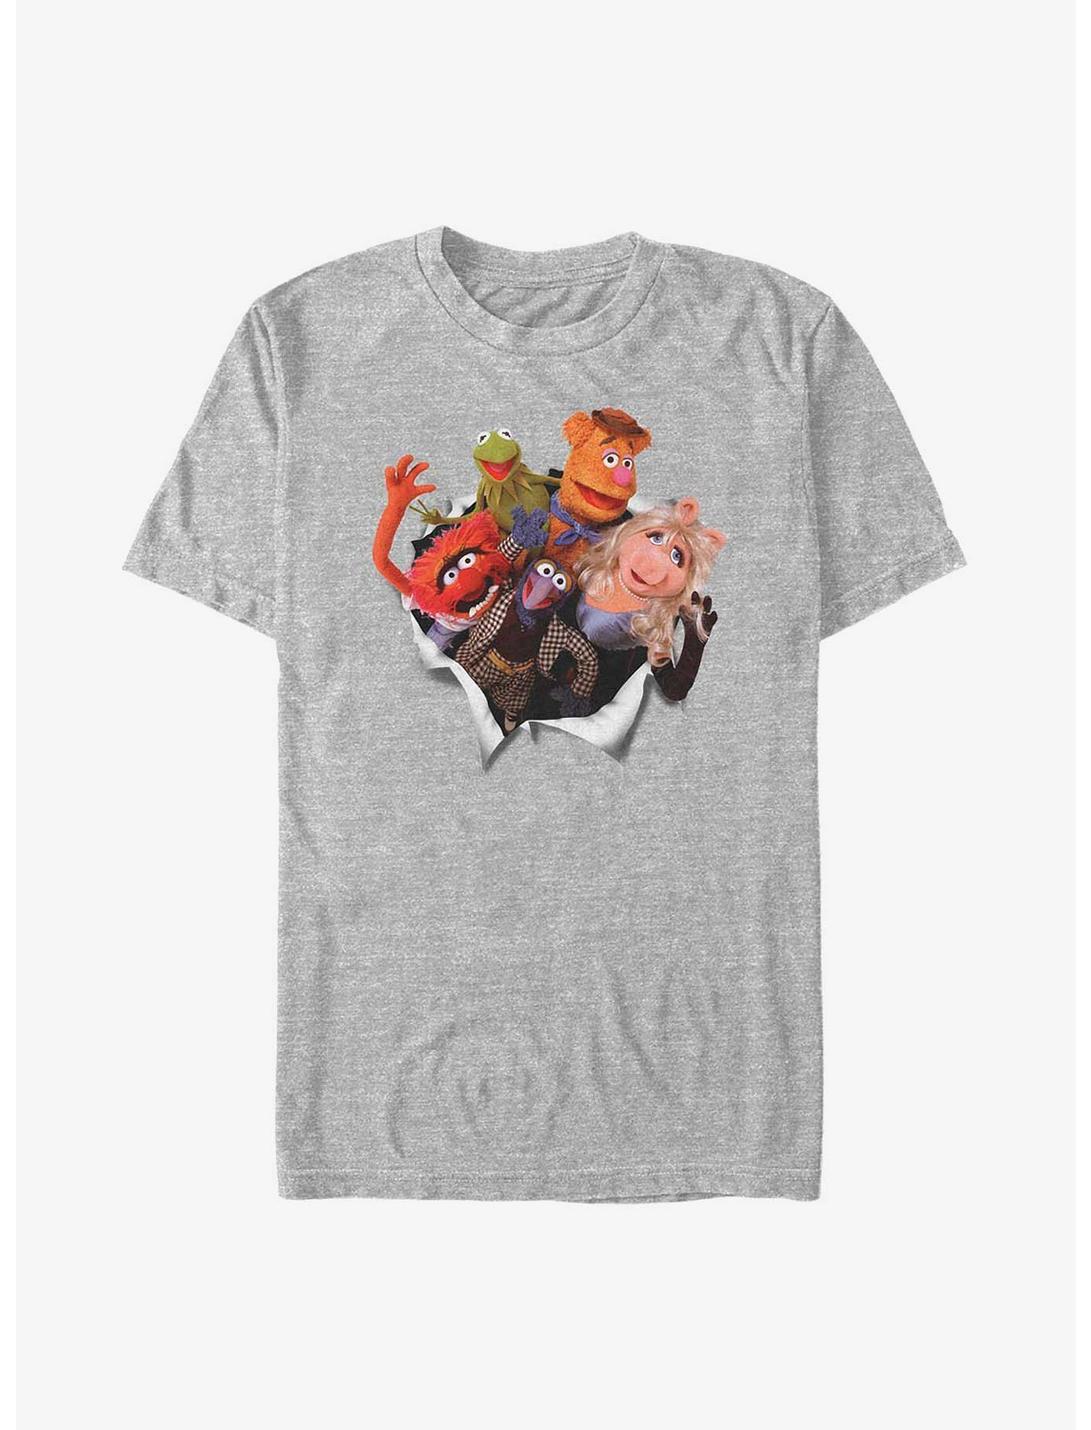 Disney The Muppets Muppet Breakout Big & Tall T-Shirt, ATH HTR, hi-res